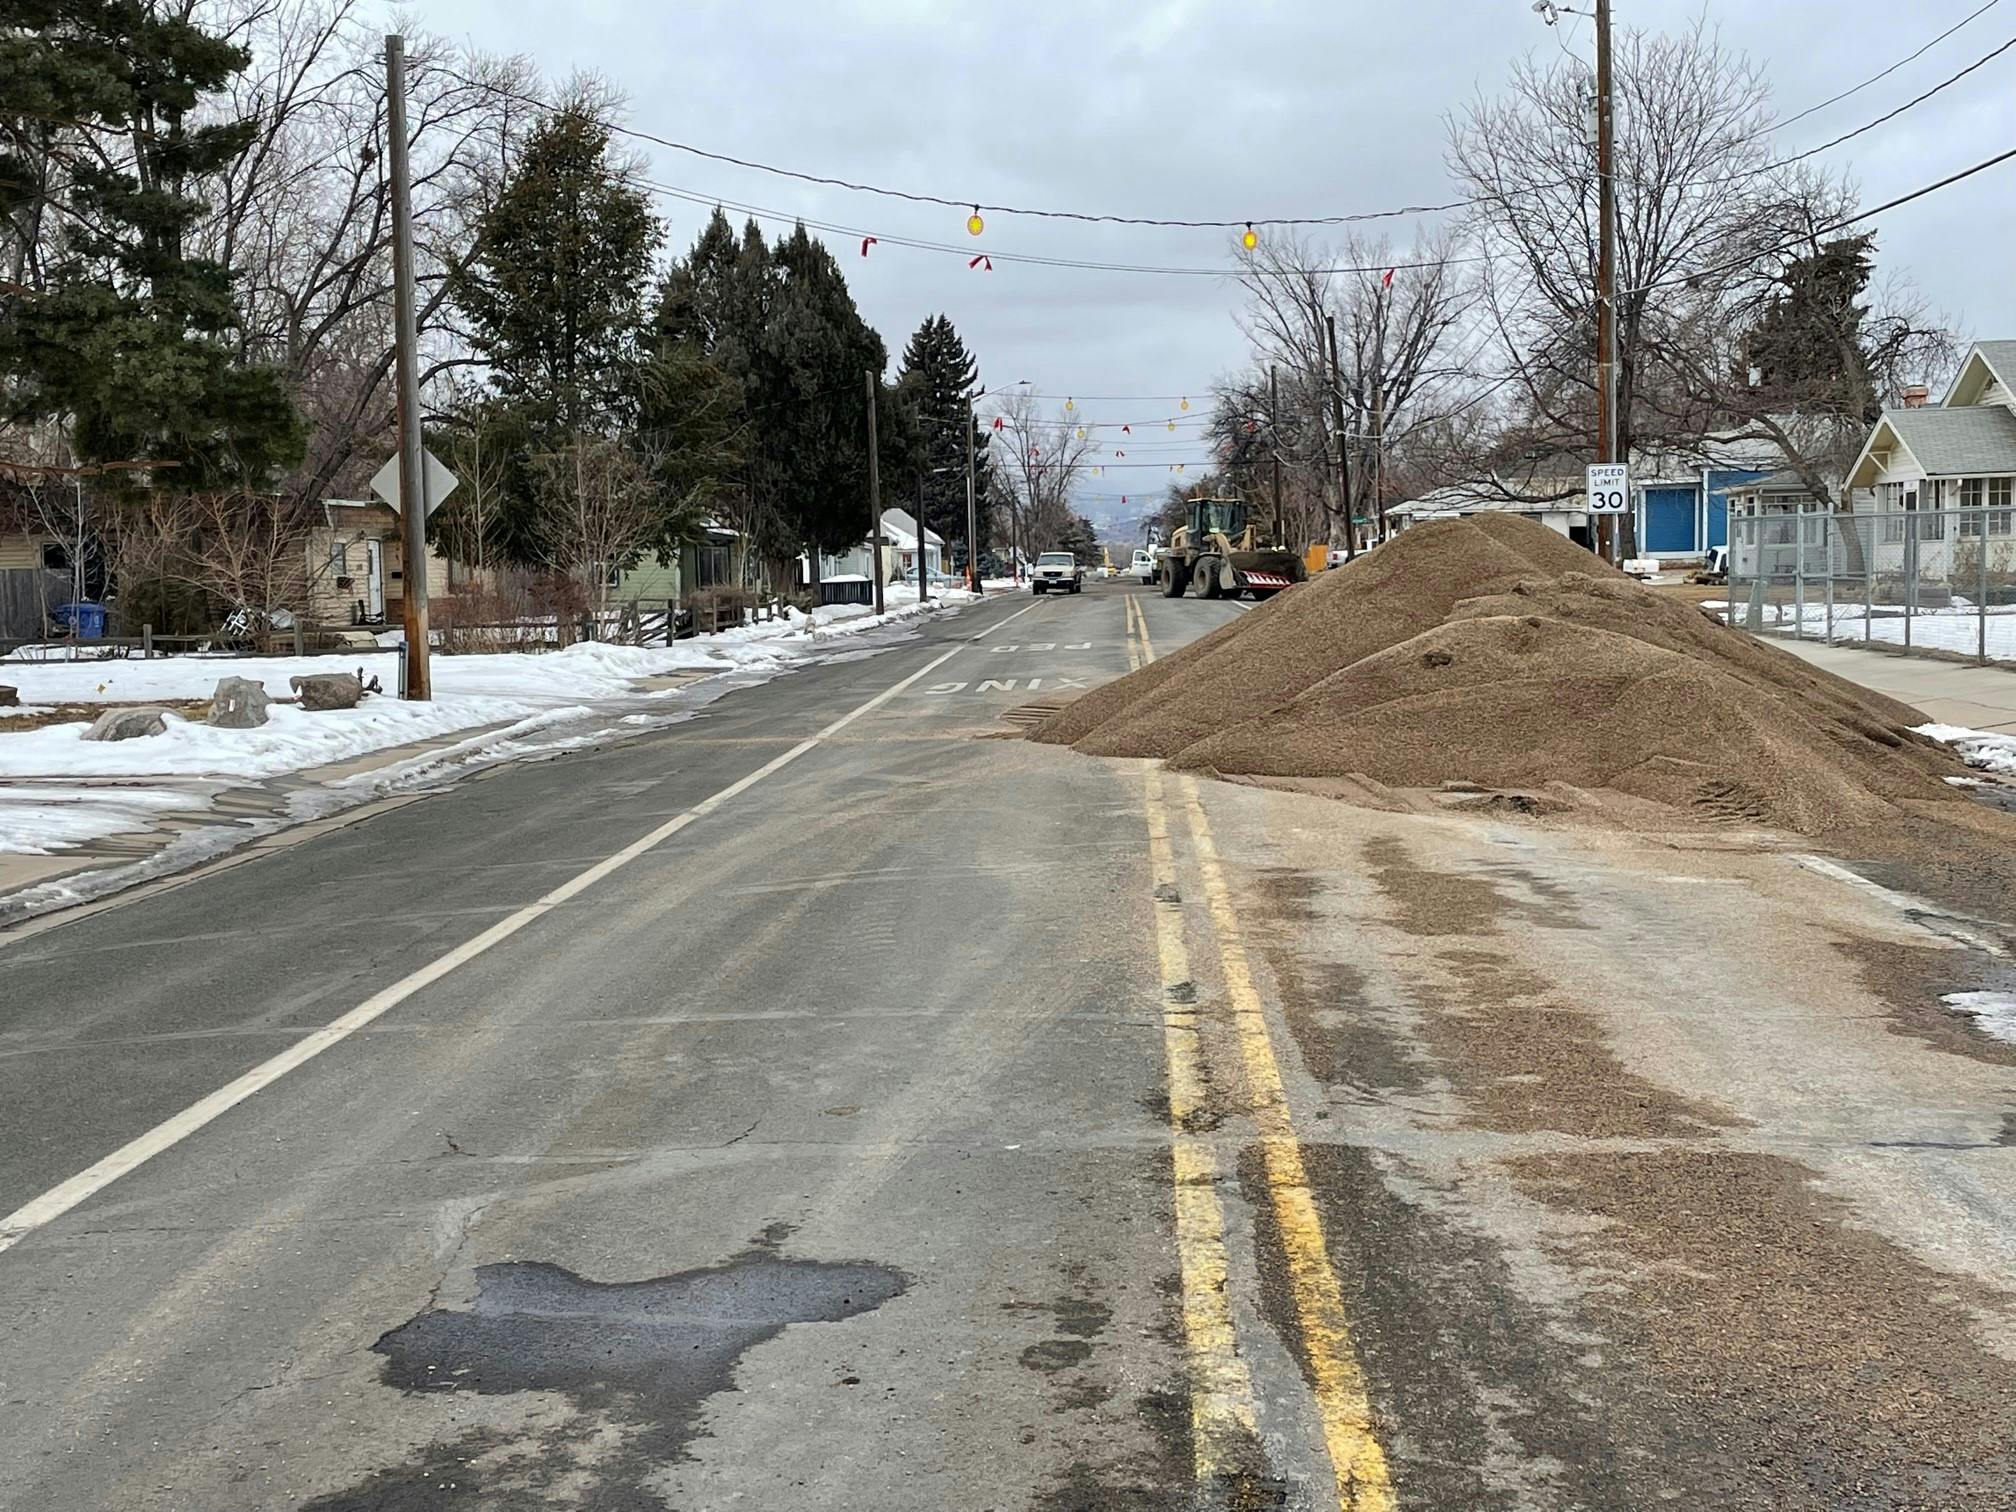 February 1, 2022 – Construction crews are also assisting with snow removal and gravel activities as needed for snowfall.